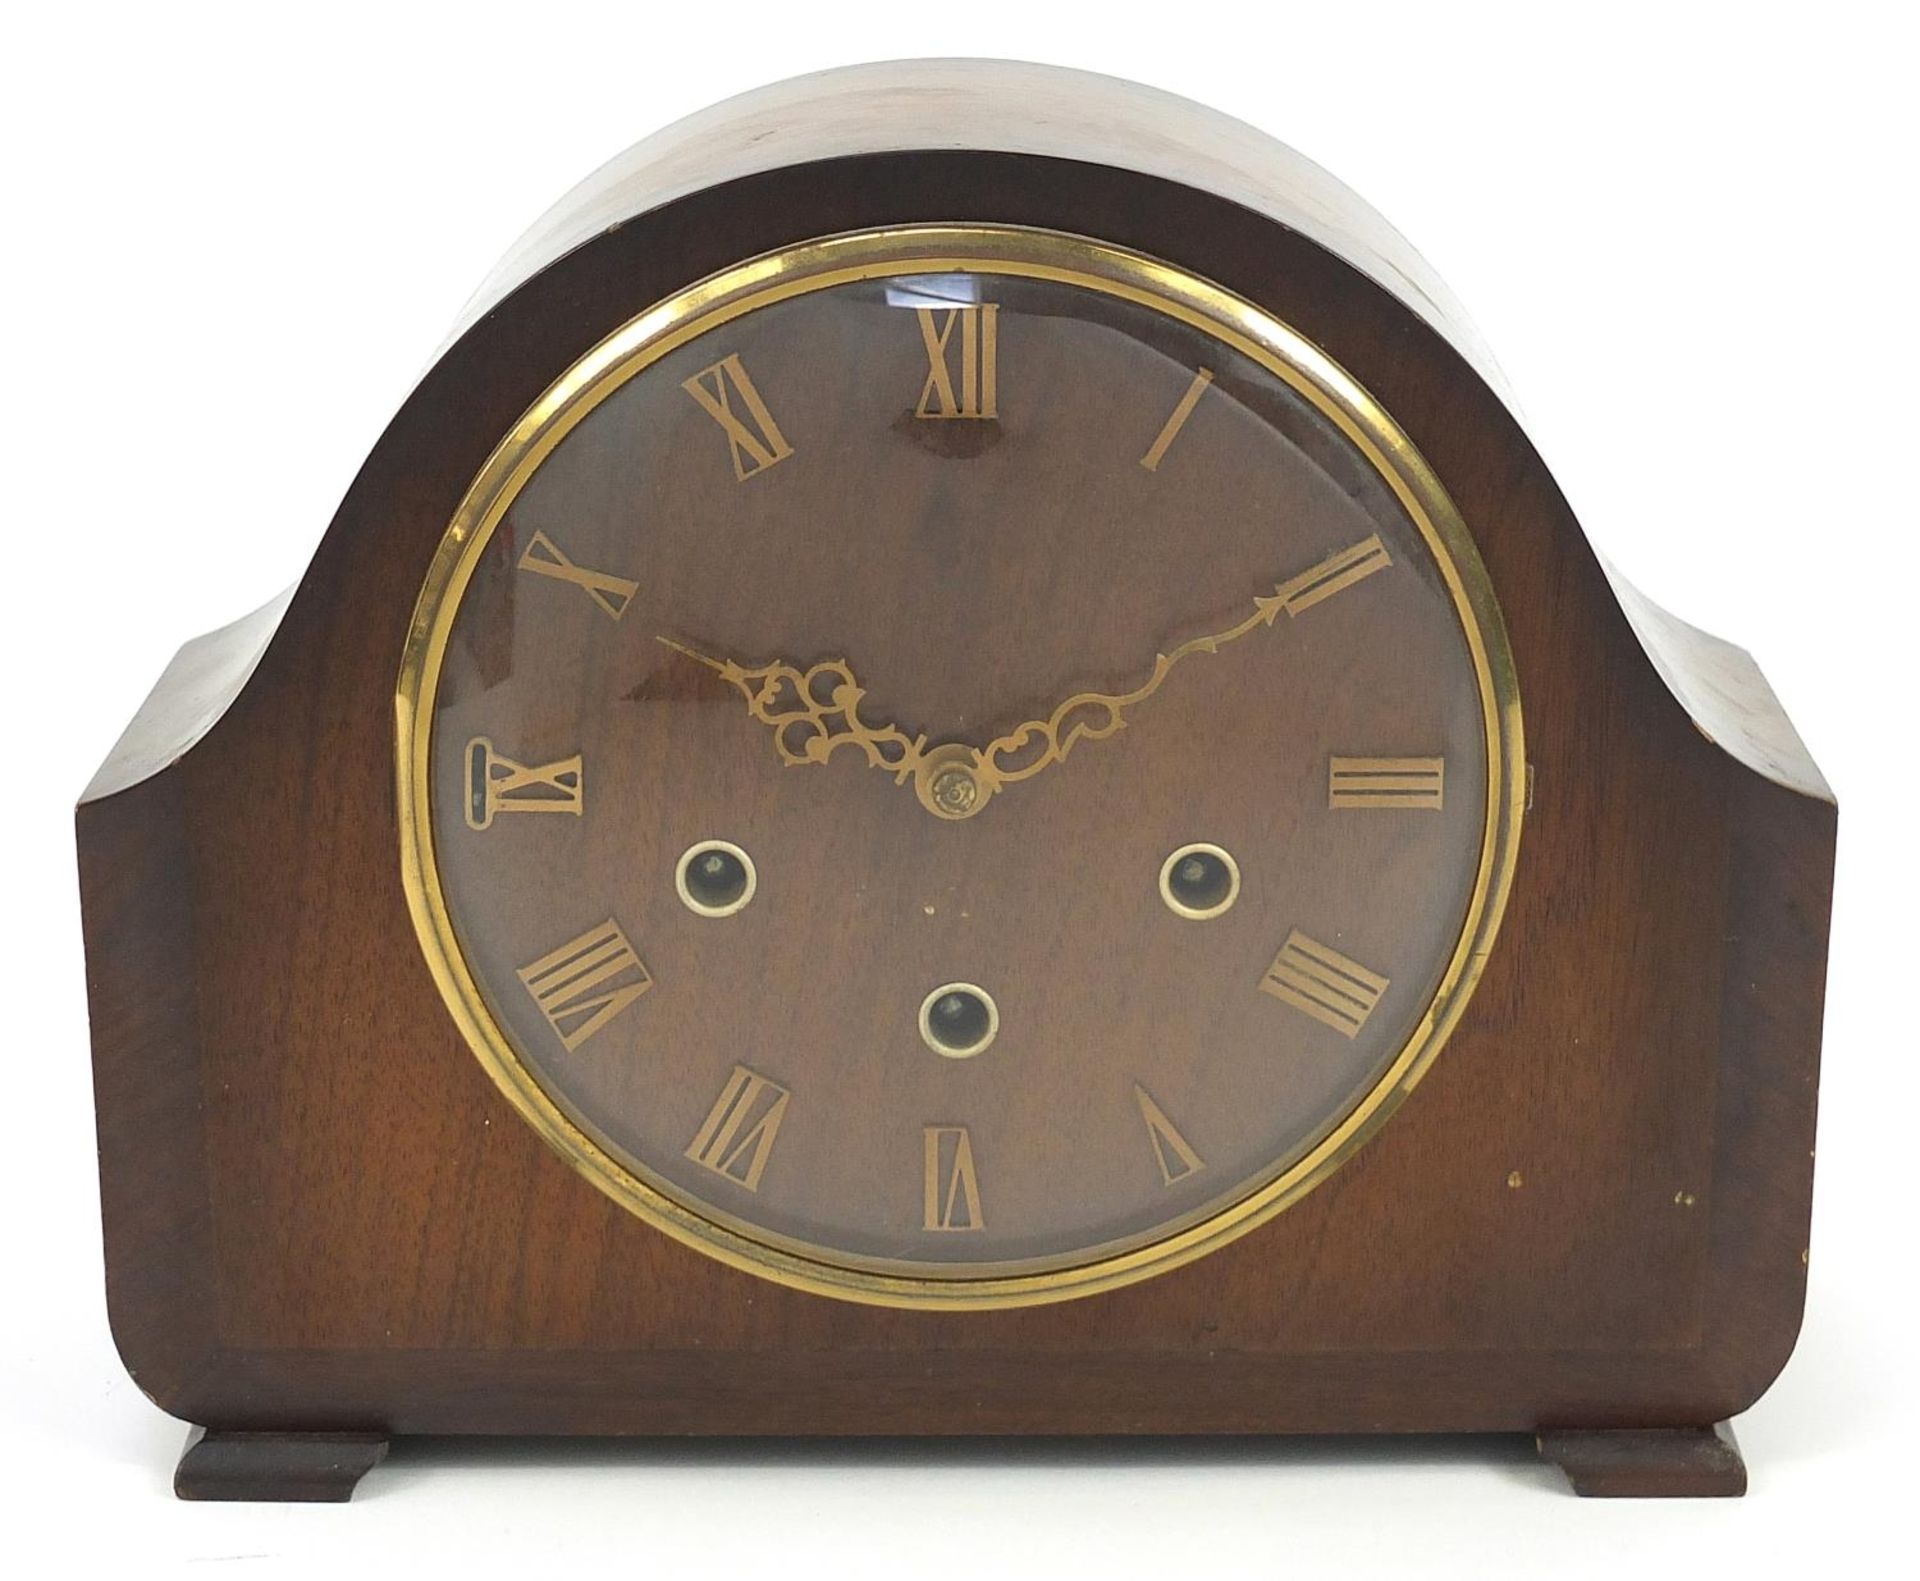 Mahogany cased Smiths mantle clock with Westminster chime, 23.5cm high x 29cm wide - Image 2 of 5